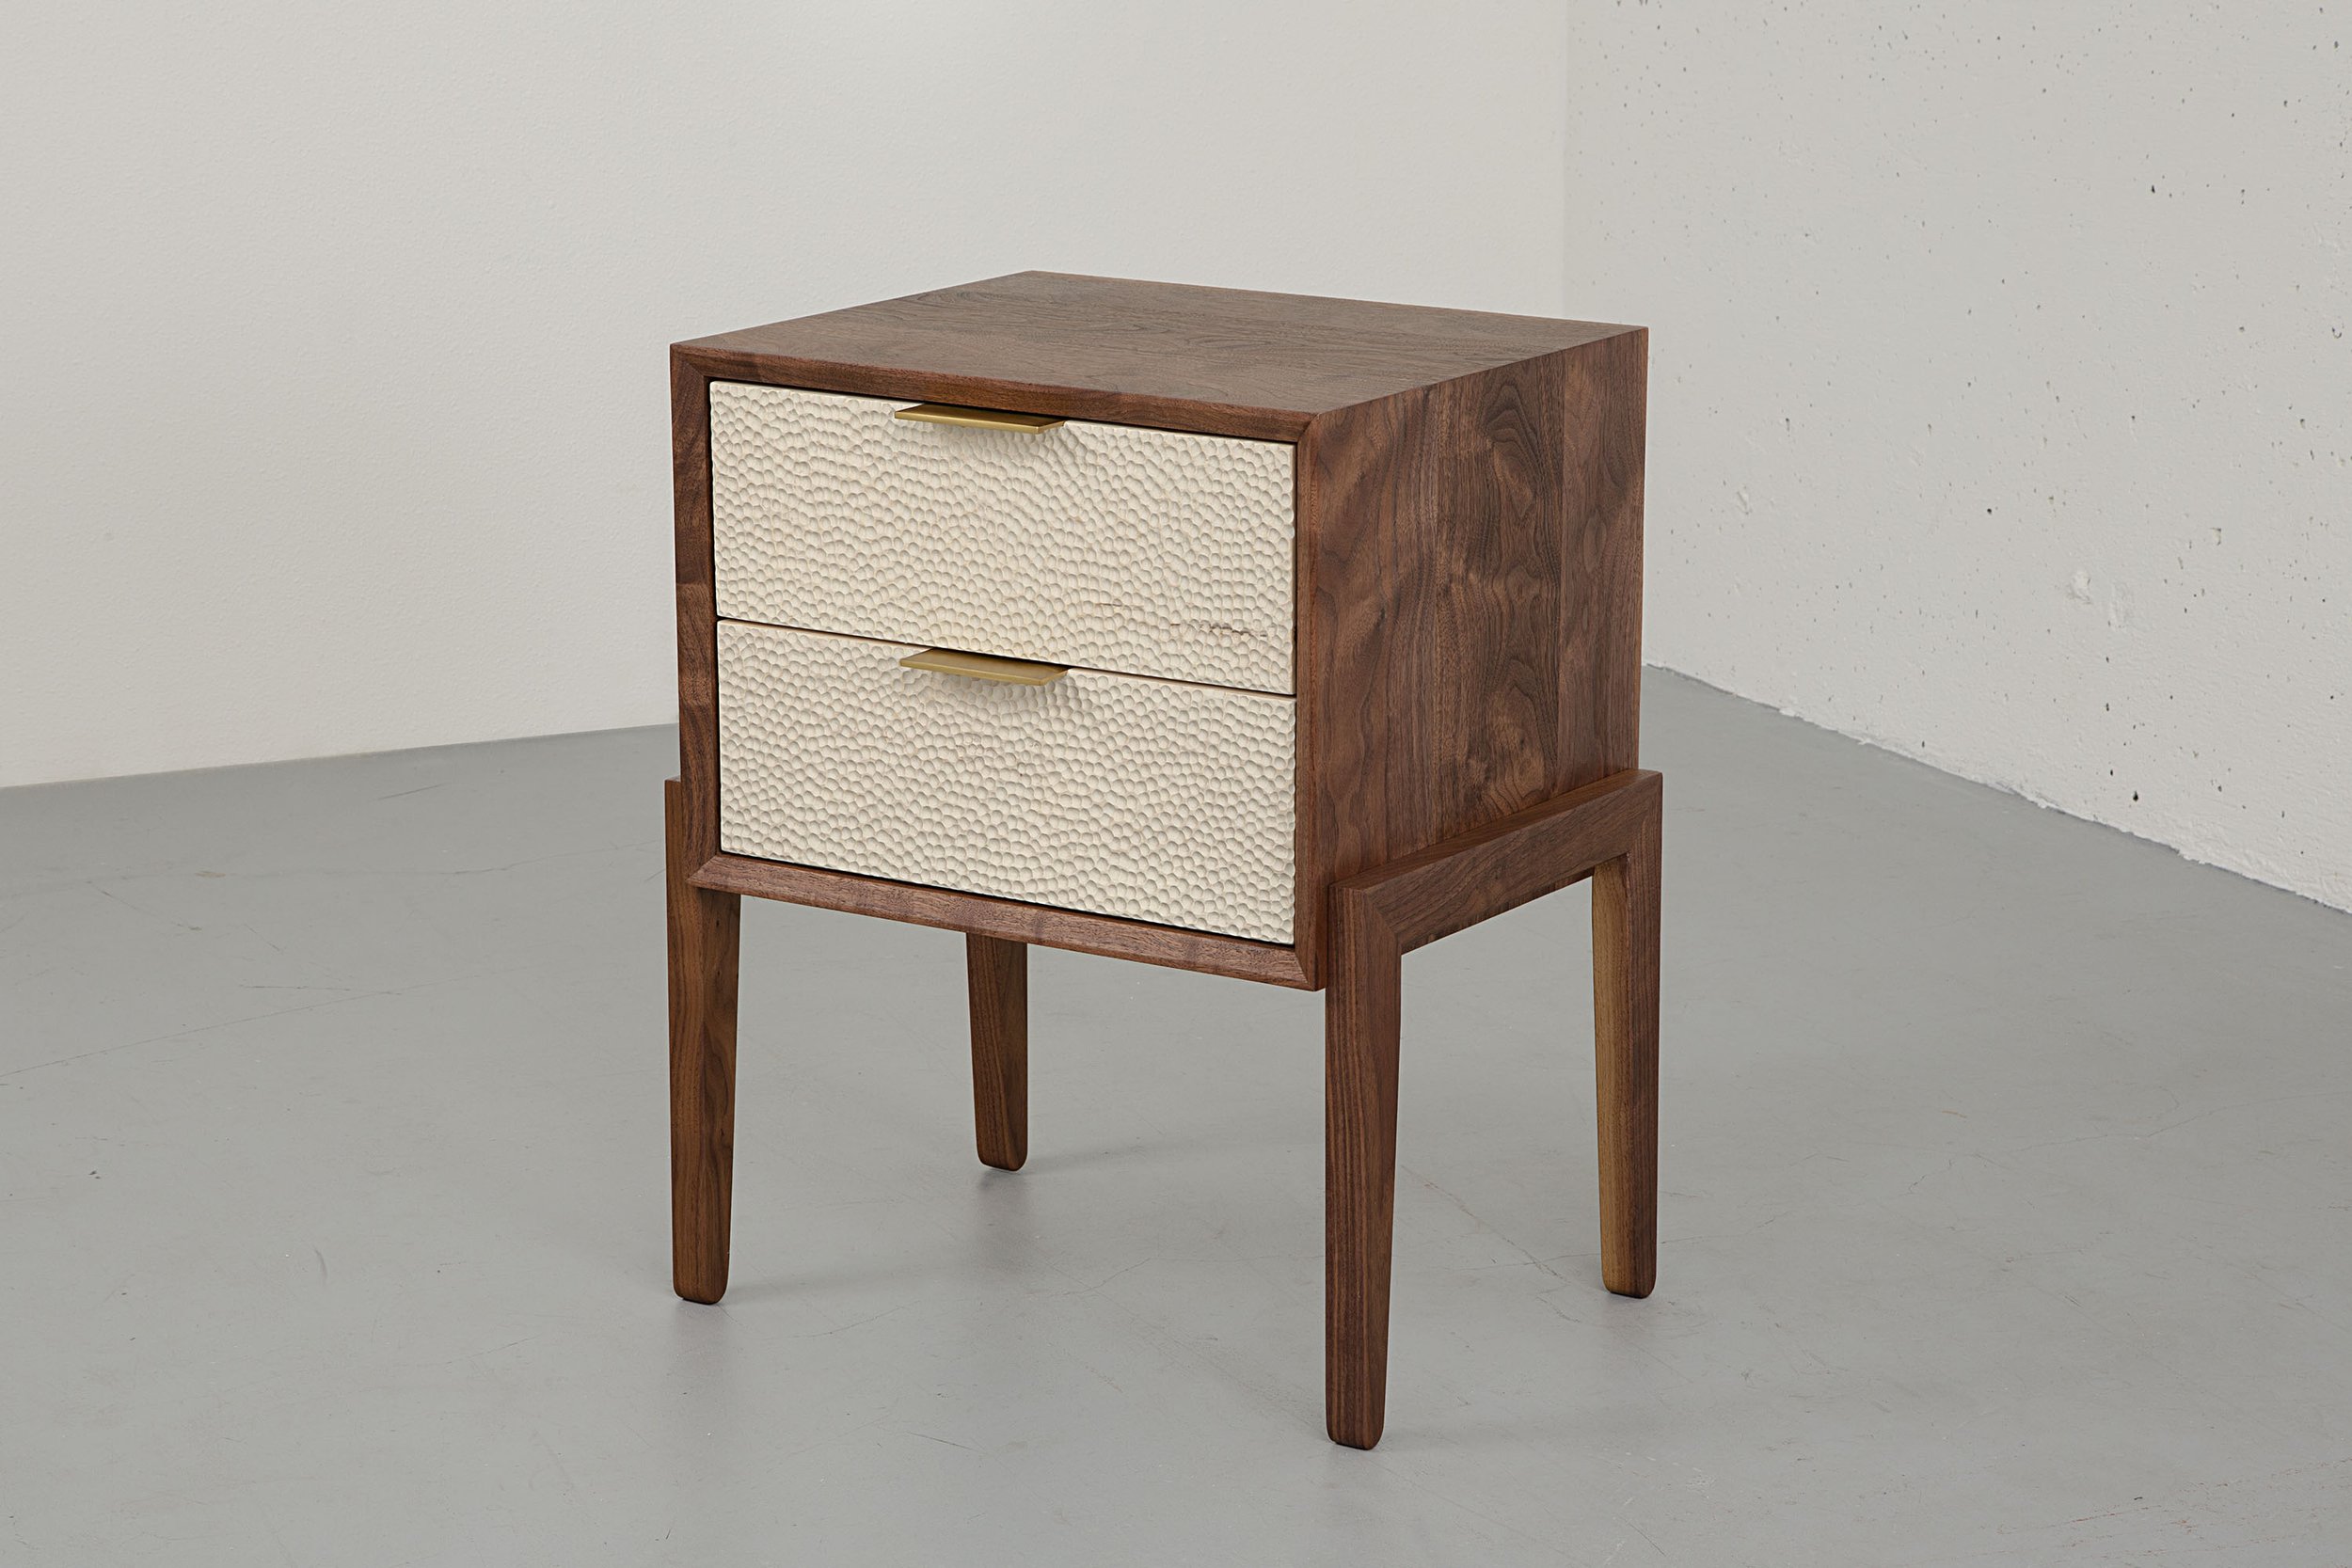 LA BRINCA NIGHTSTAND in american walnut and carved bleached maple